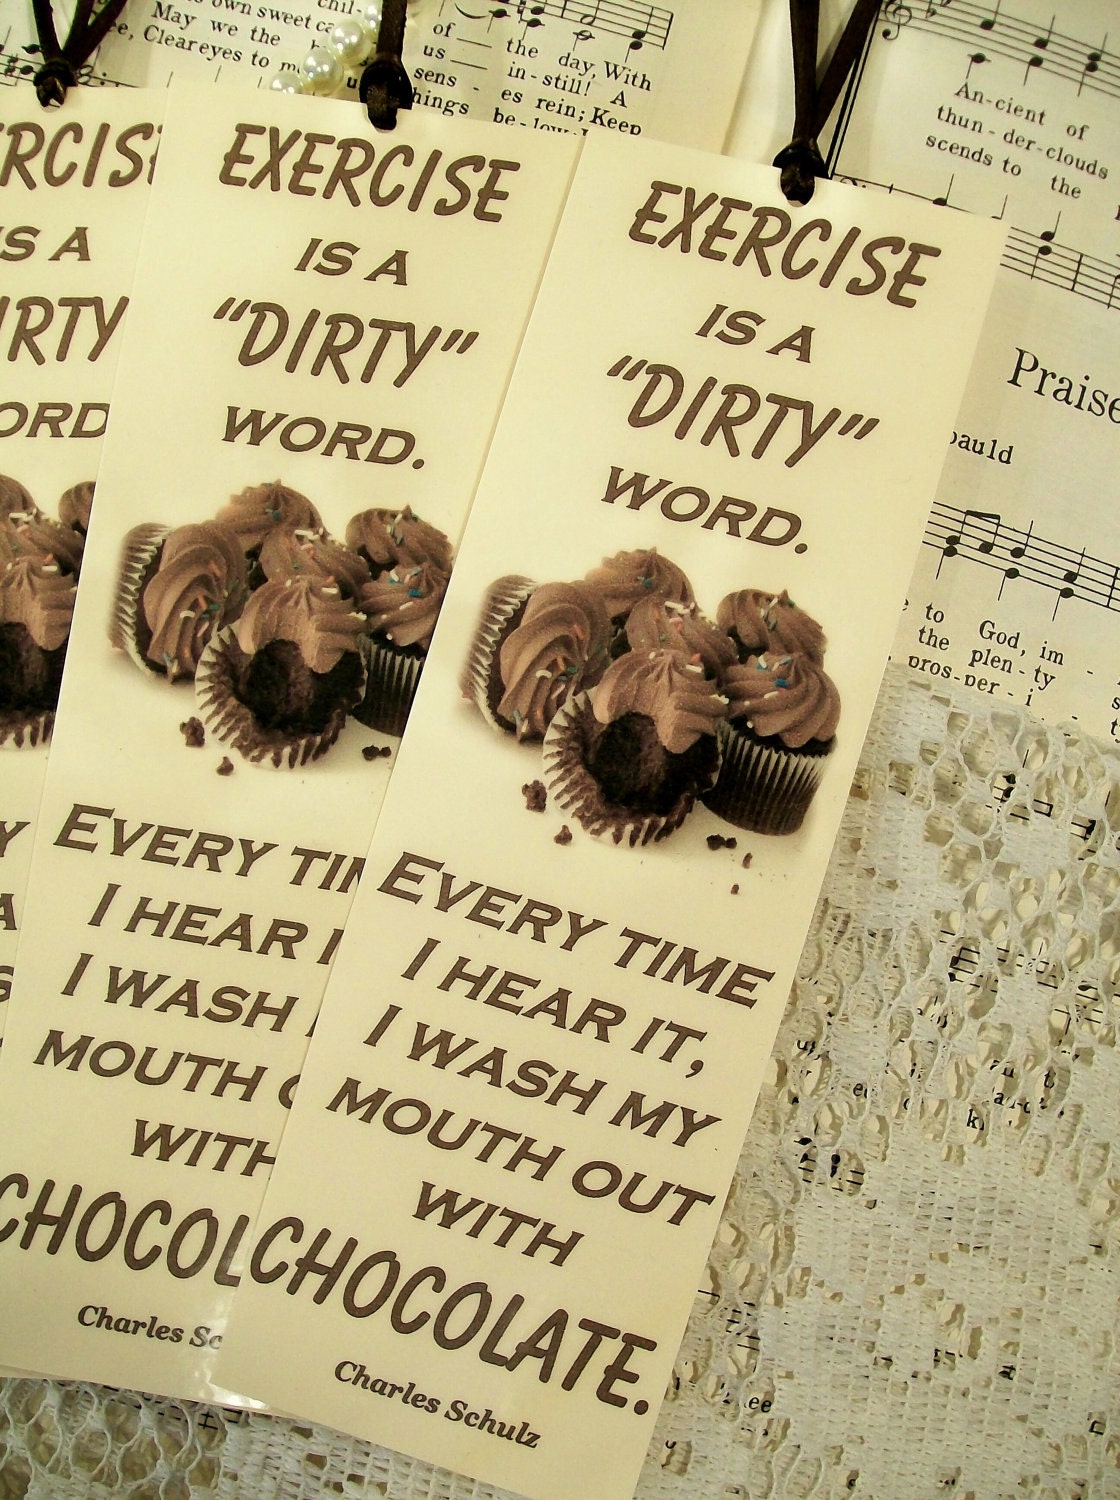 Bookmark Funny Exercise and Chocolate Humorous Bookmarks and Gifts